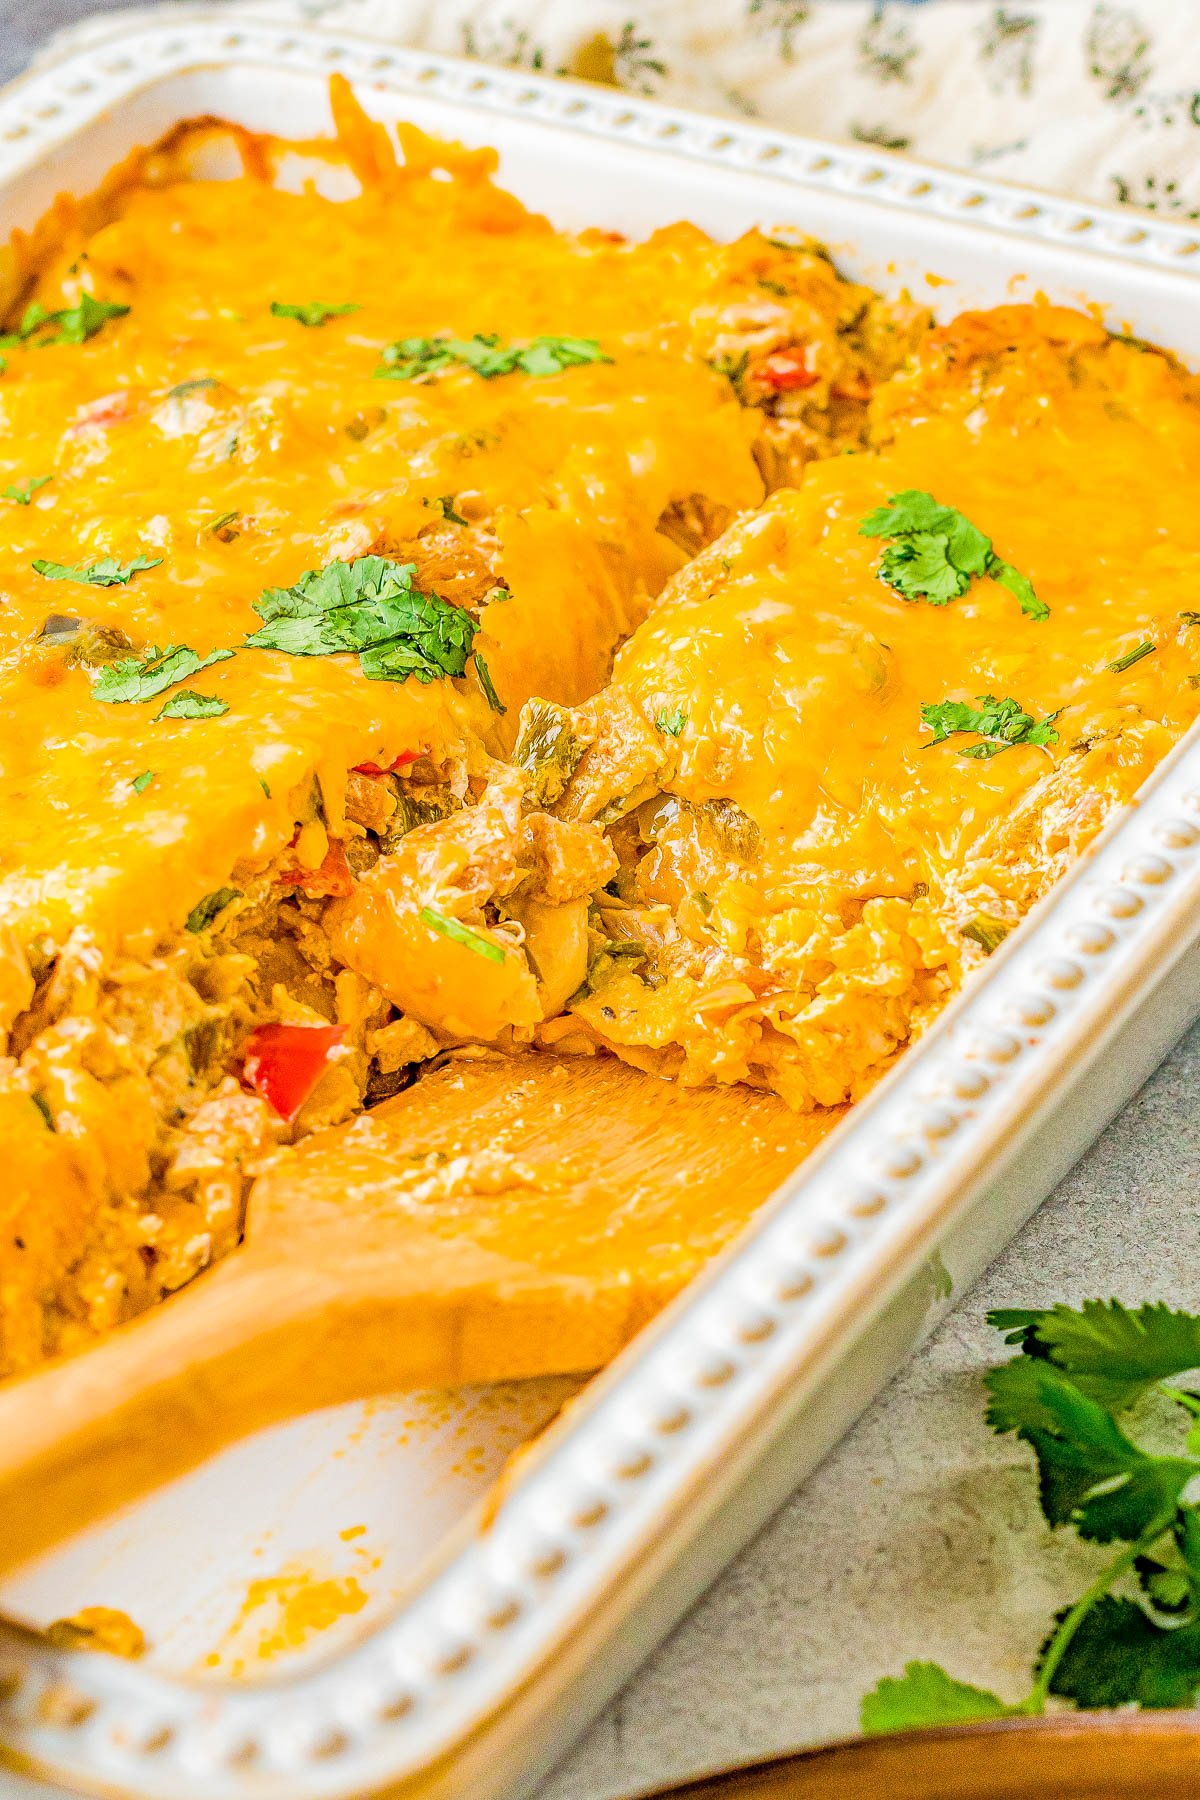 King Ranch Chicken - Nothing says comfort food like an EASY casserole recipe with shredded chicken, cheese, salsa, sour cream, layered with tortillas, and seasoned to perfection! Use rotisserie chicken to save time making this a great family-friendly weeknight dinner recipe!